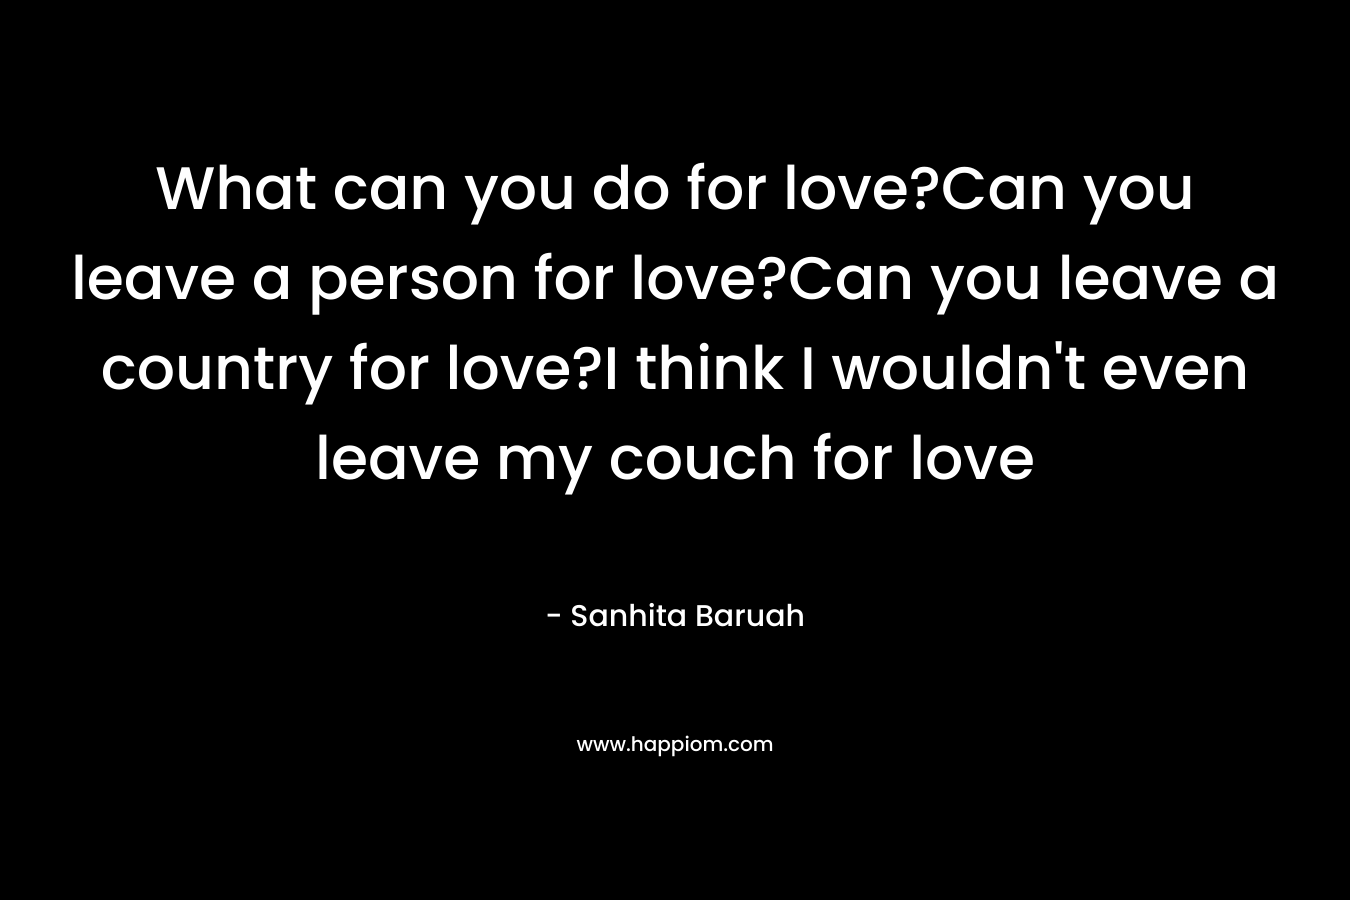 What can you do for love?Can you leave a person for love?Can you leave a country for love?I think I wouldn't even leave my couch for love